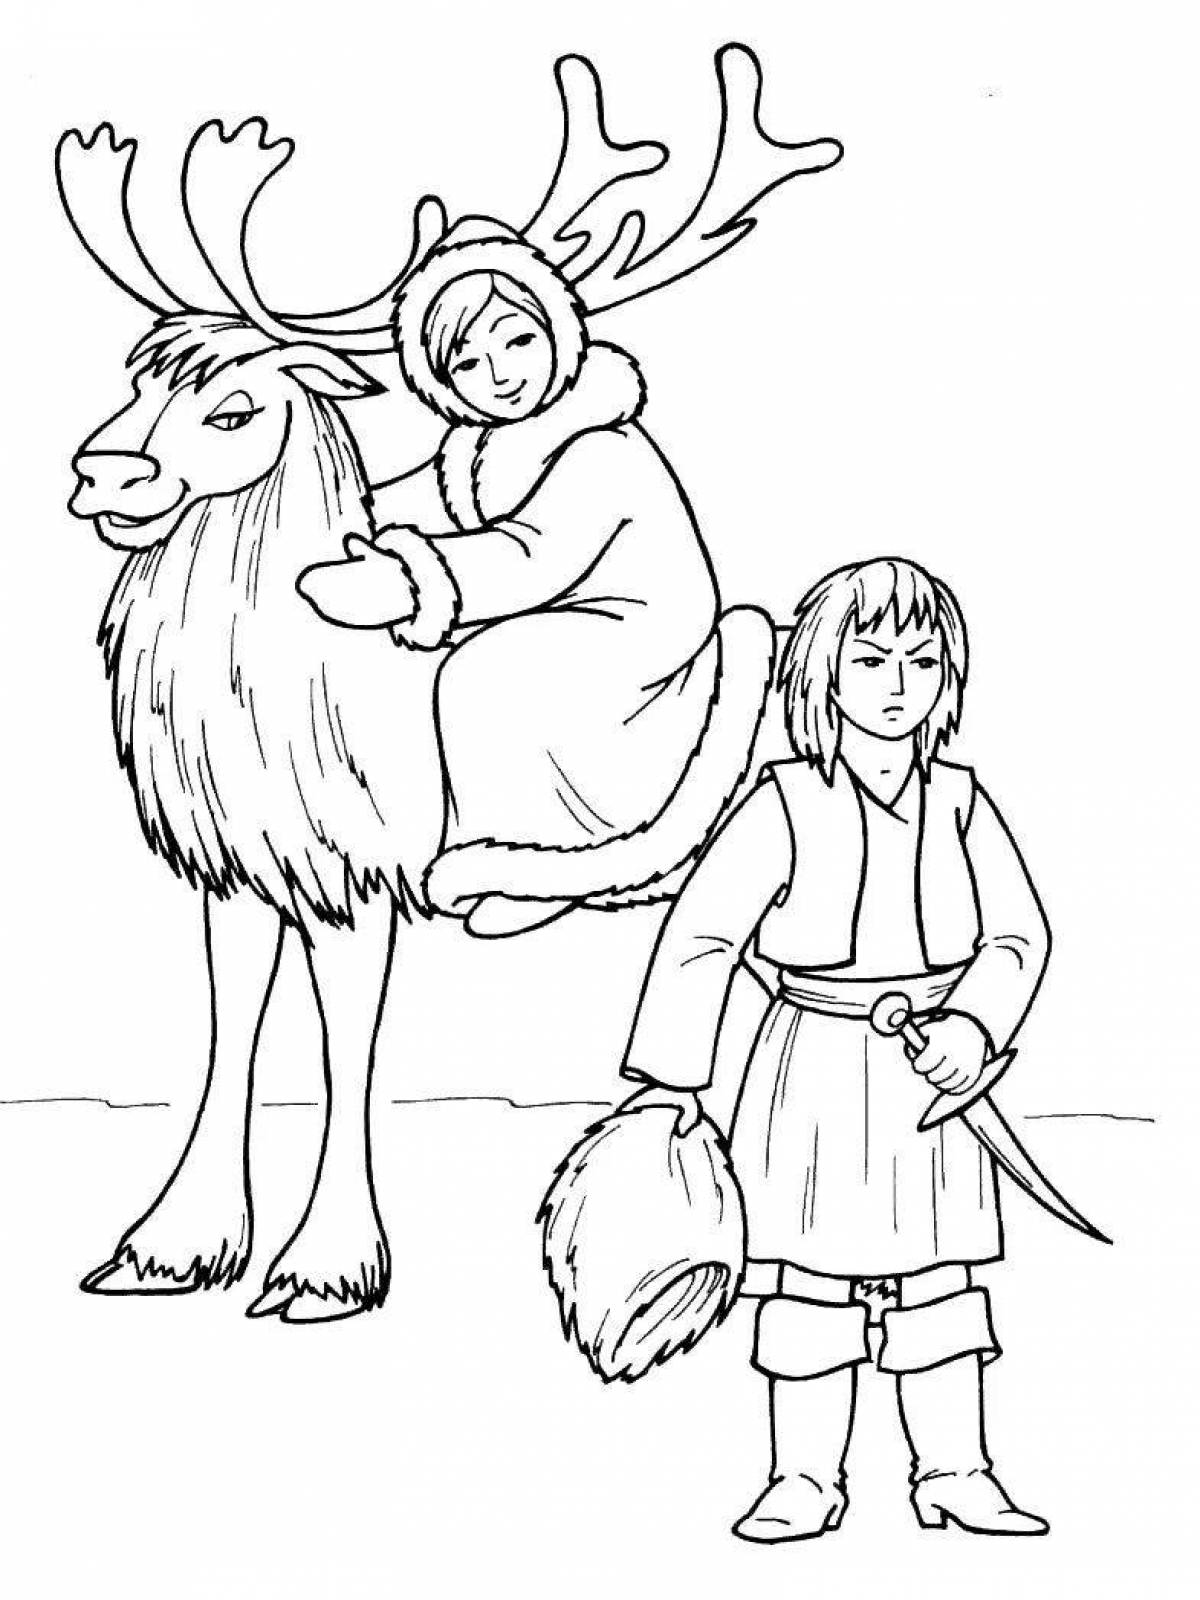 Coloring page charming Nenets